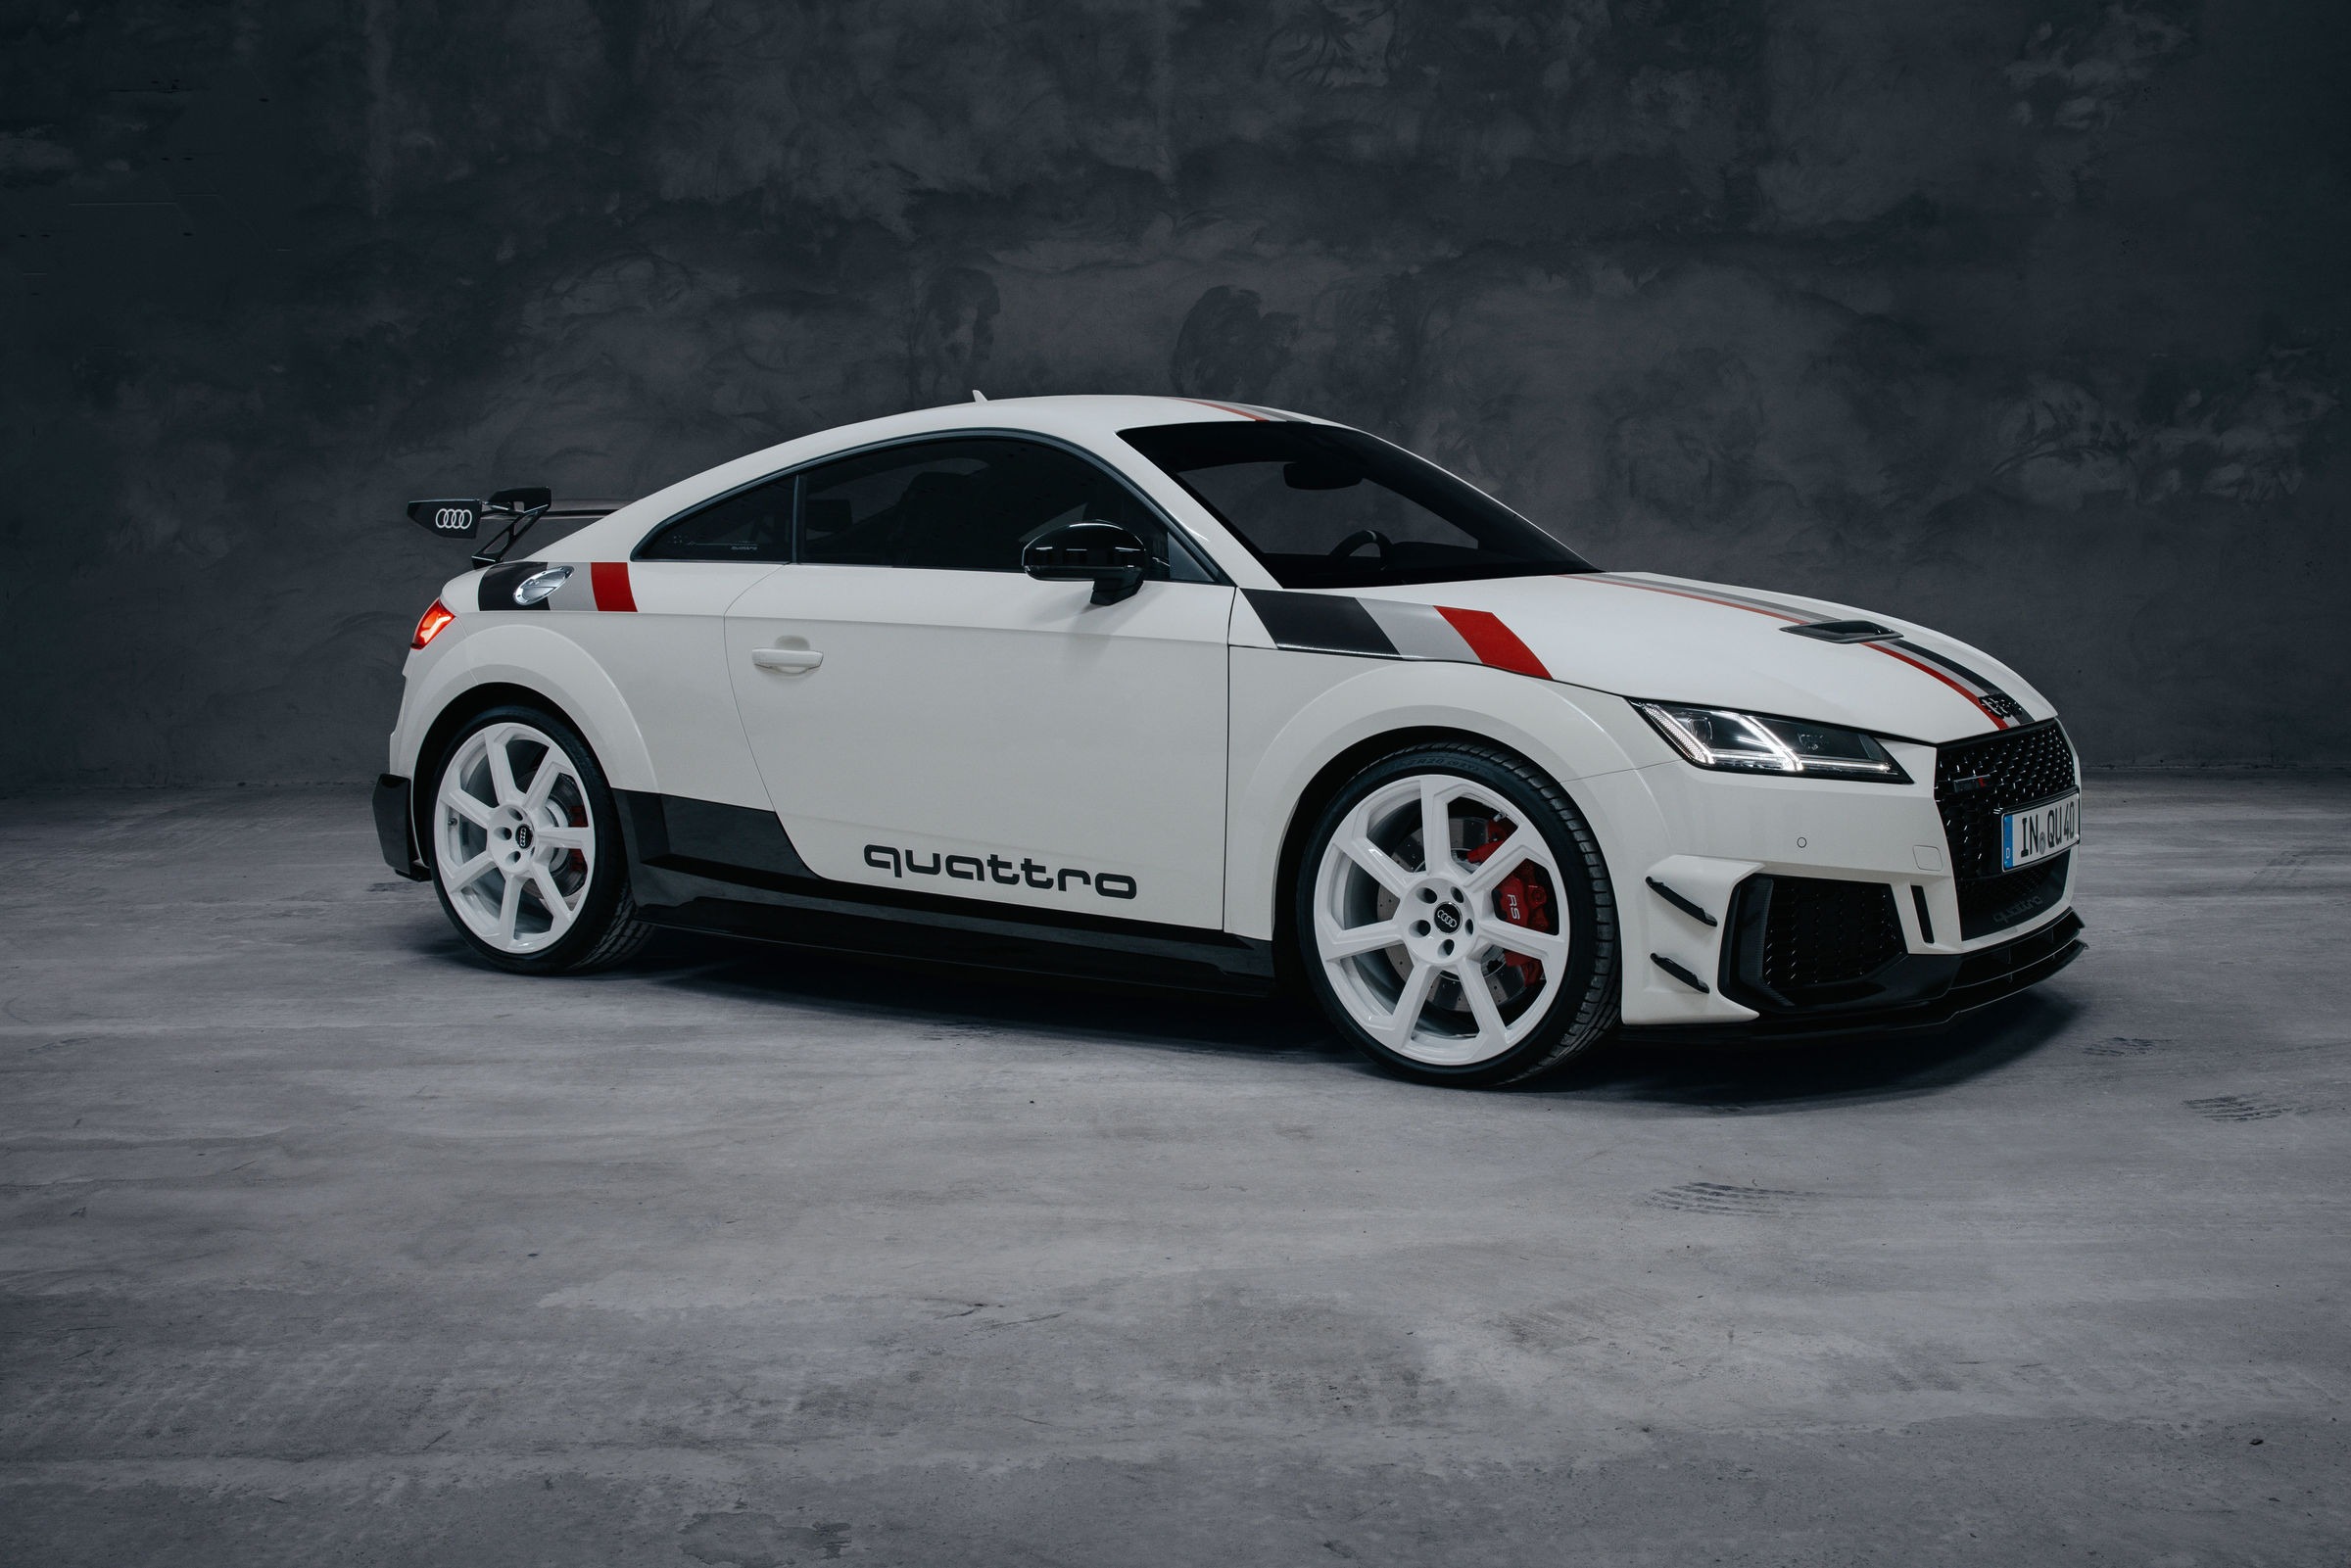 Limited-edition special model marks anniversary: the new Audi TT RS 40 years of quattro